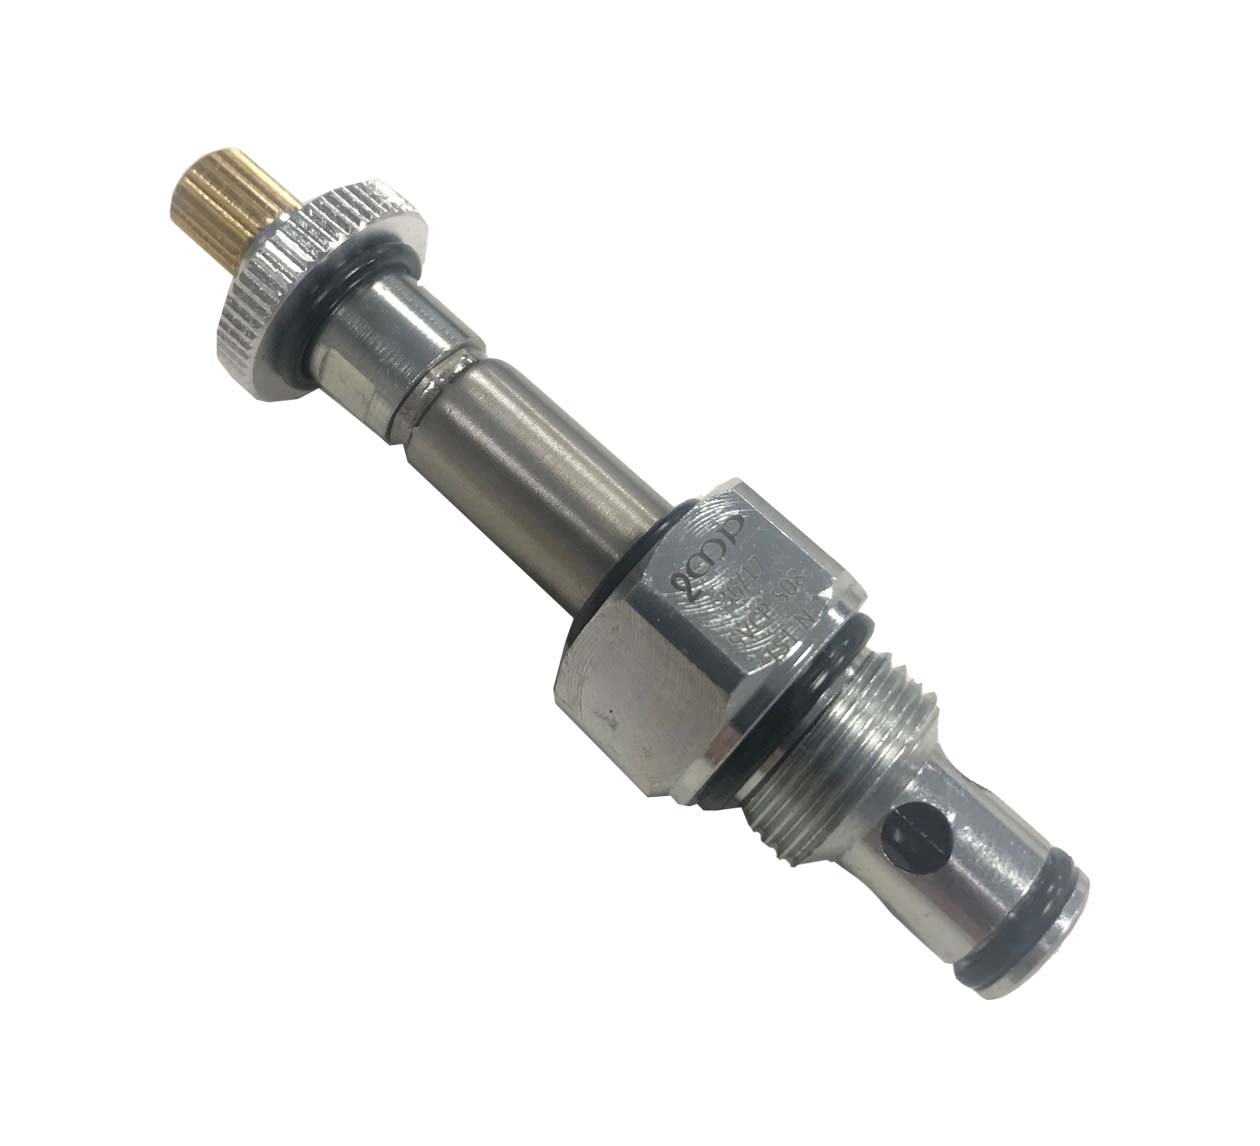 Normally Closed 2 Way, 2 Position Cartridge Solenoid Valve Manual Override, 40L/MIN